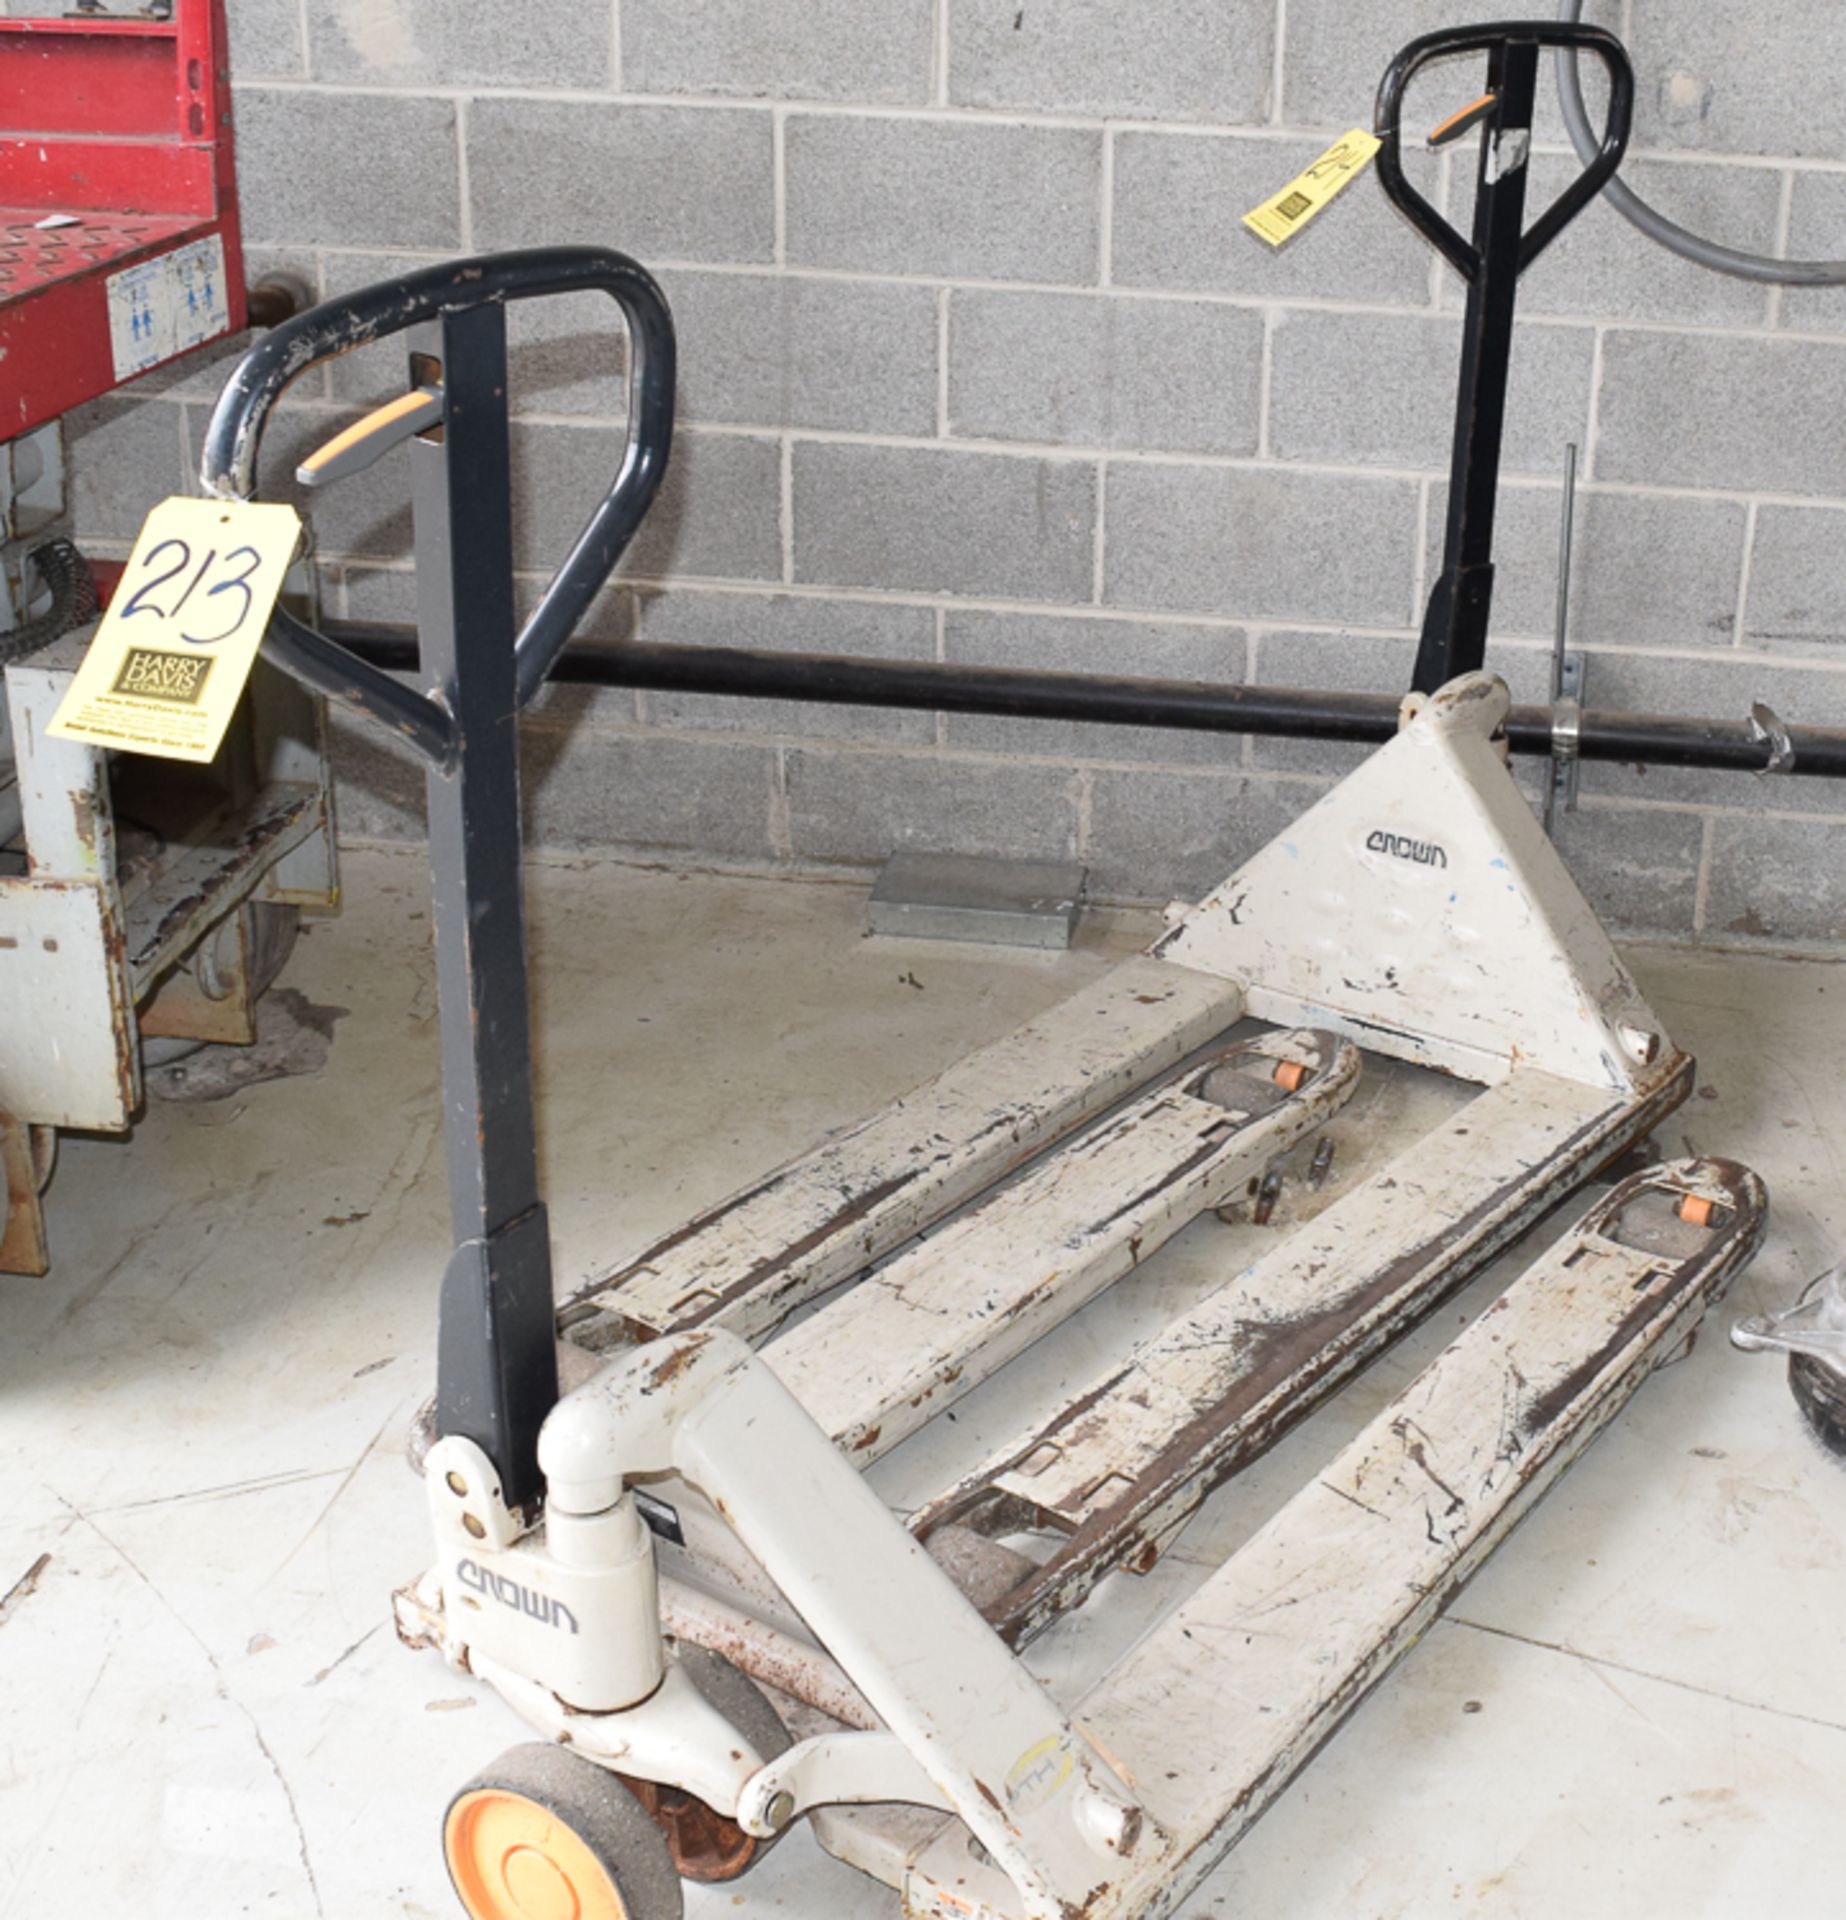 Crown Hydraulic Pallet Jack, Rigging Fee: Please Contact US Rigging 920-655-2767